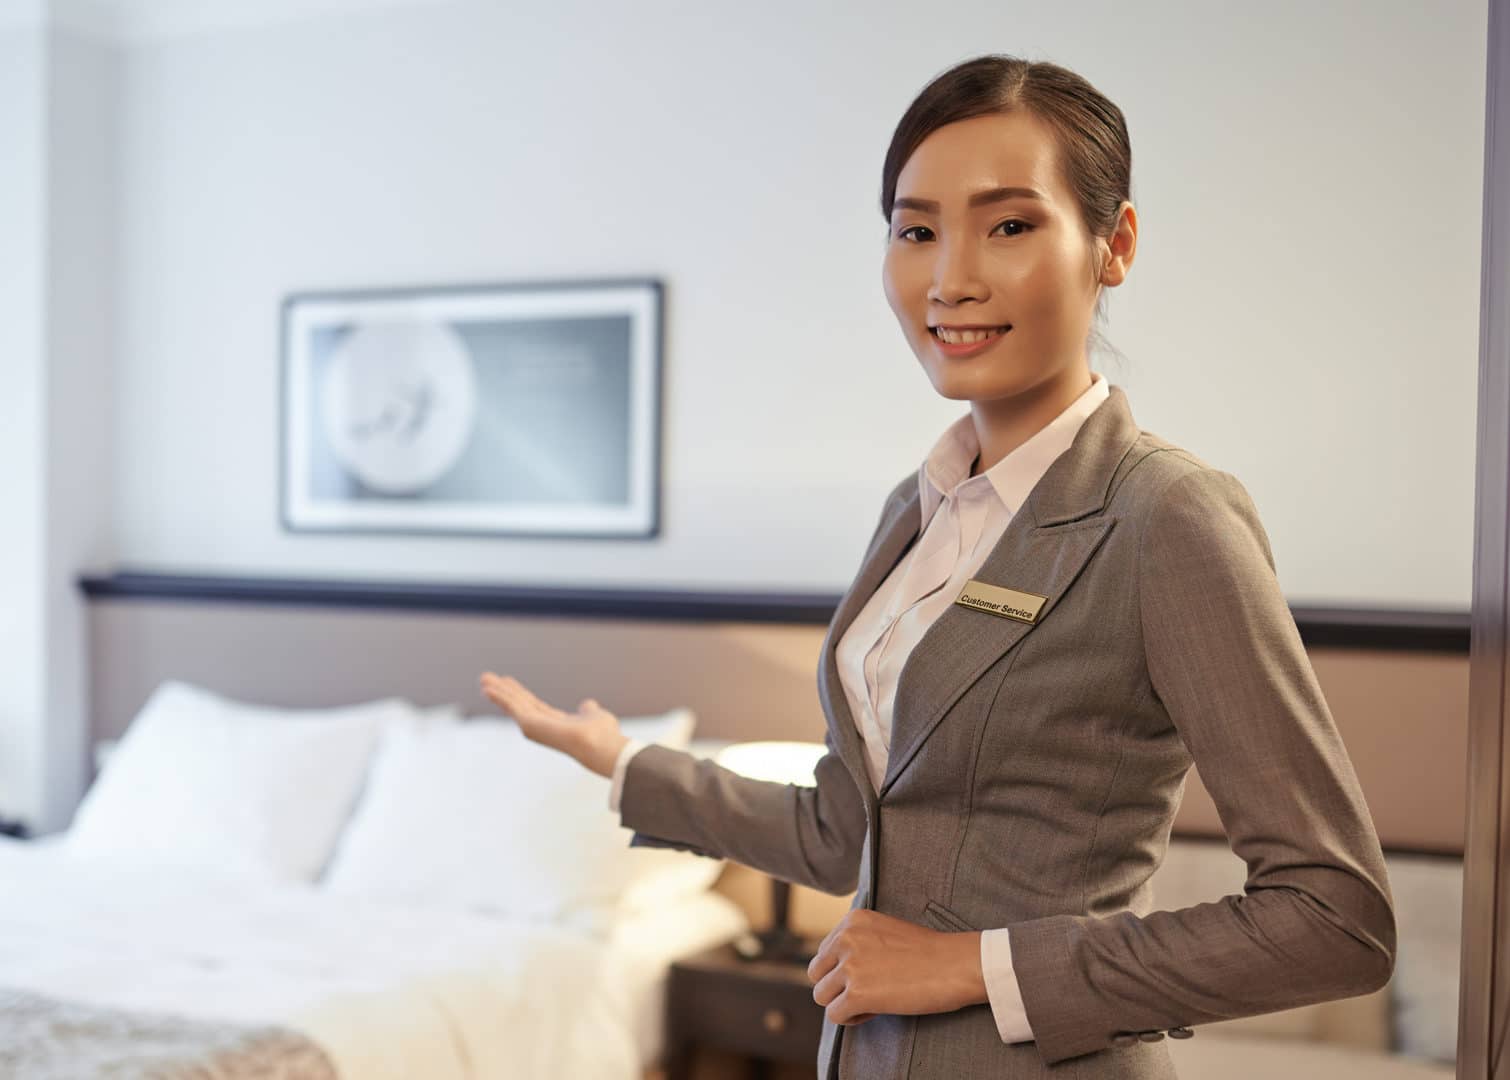 Hospitality & Tourism Management | Courses For Degree | Career Girls